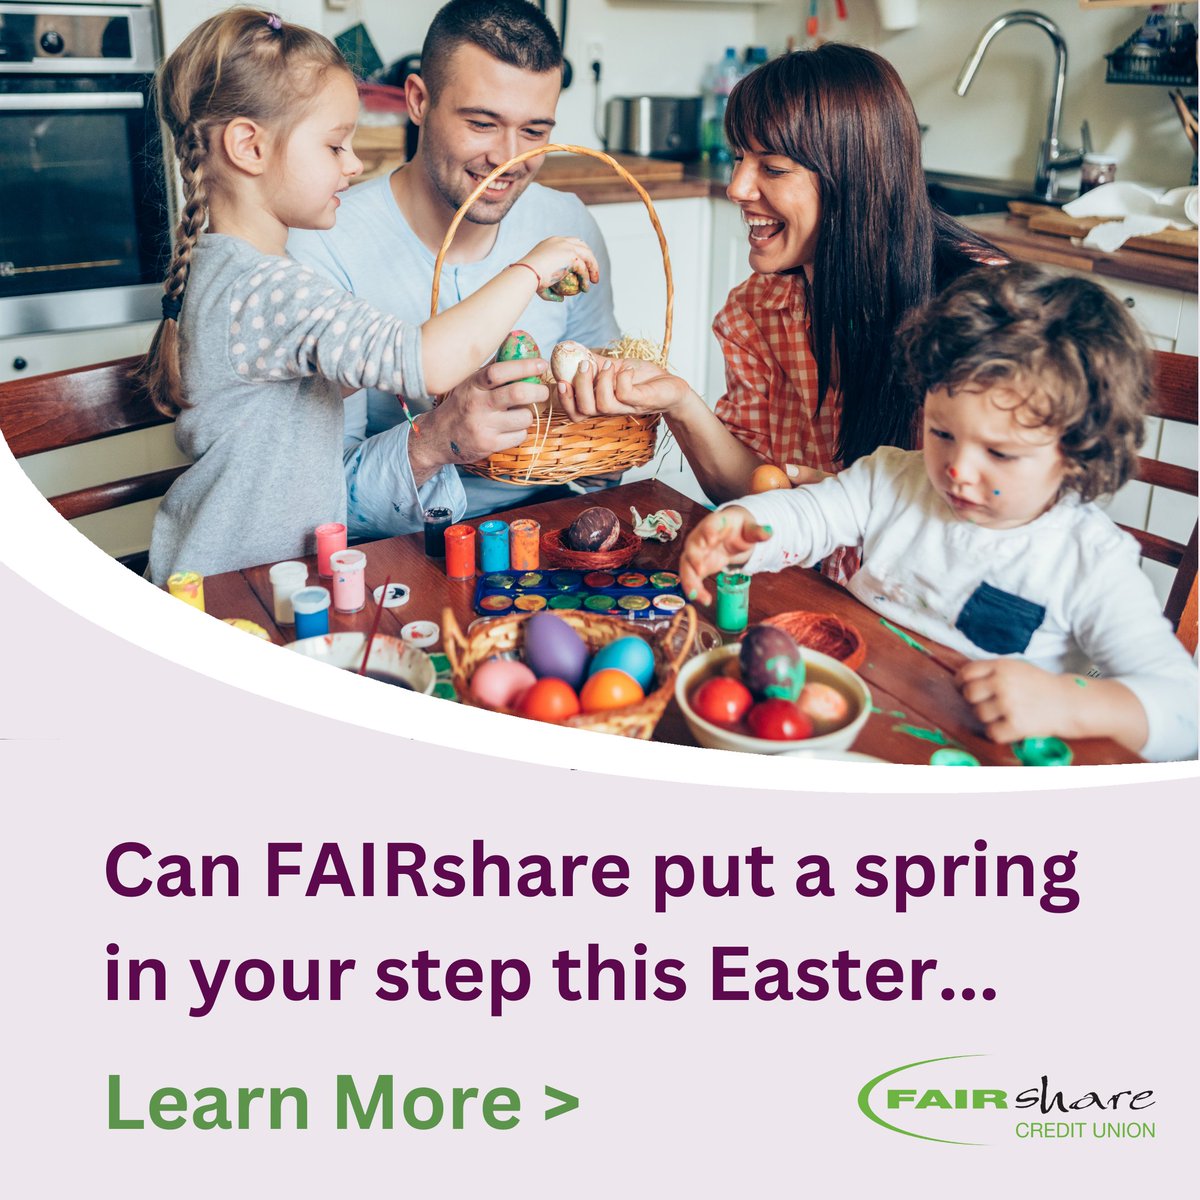 Would you like to make Easter plans but feel you need support?🐣FAIRshare provides safe money management: flexible savings & loans based on affordability. Learn more: fairshare.uk.com T&Cs apply #notforprofit #communitybank #peoplebeforeprofit